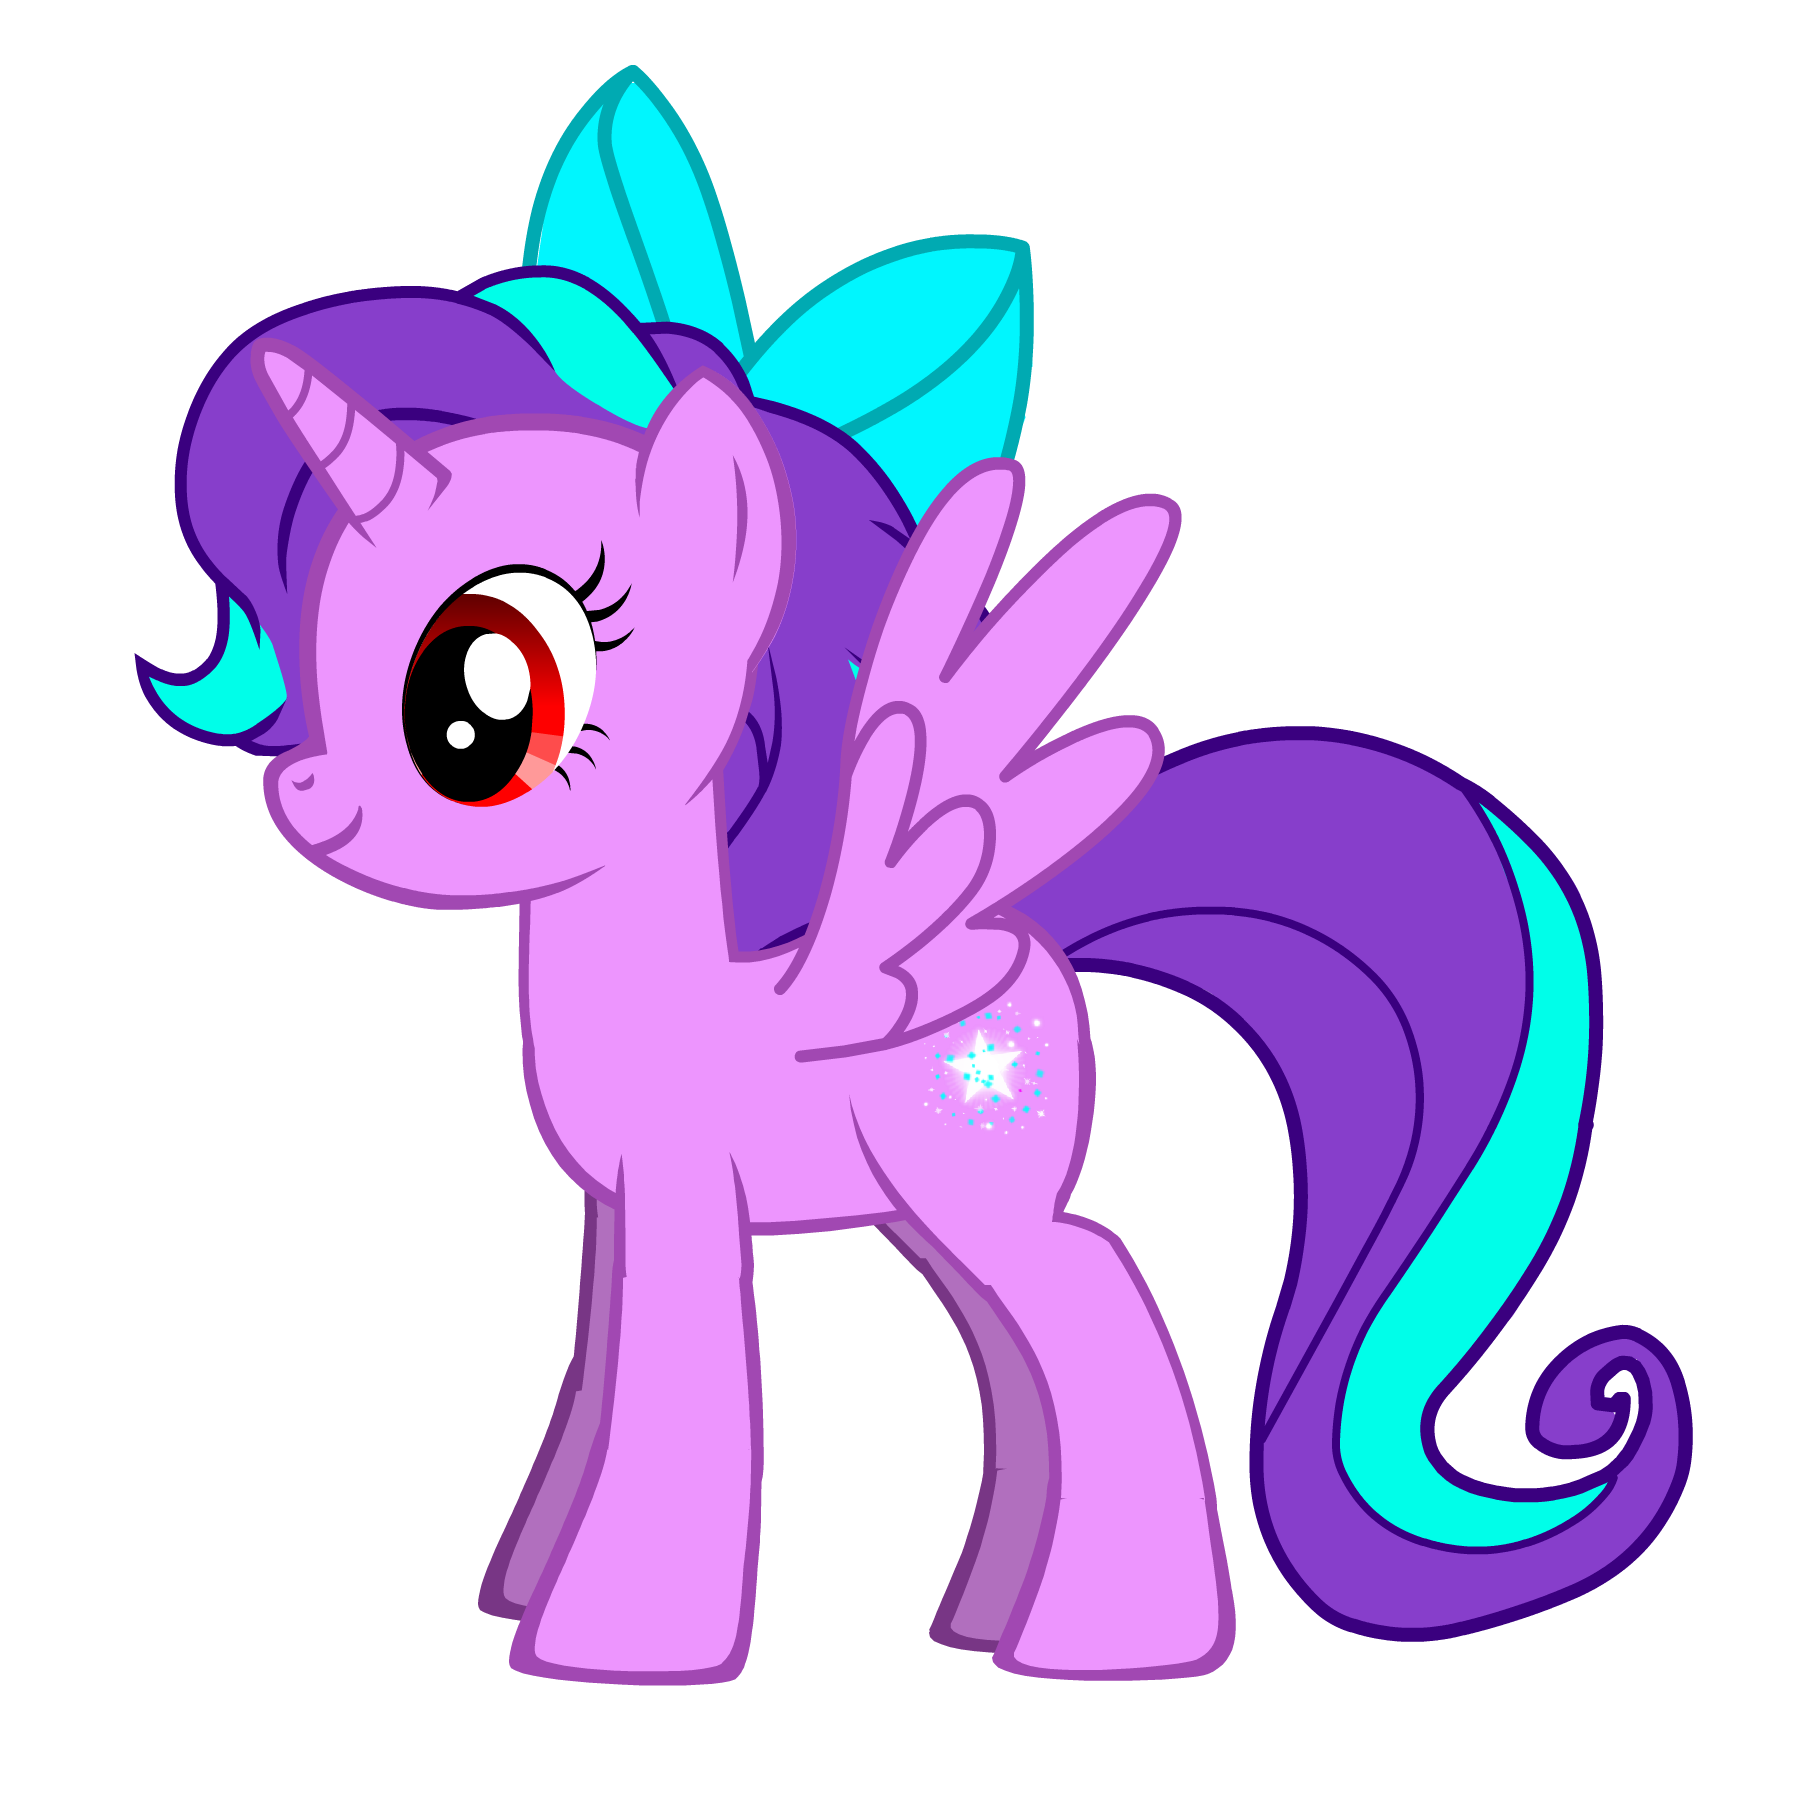 1000+ images about My little pony